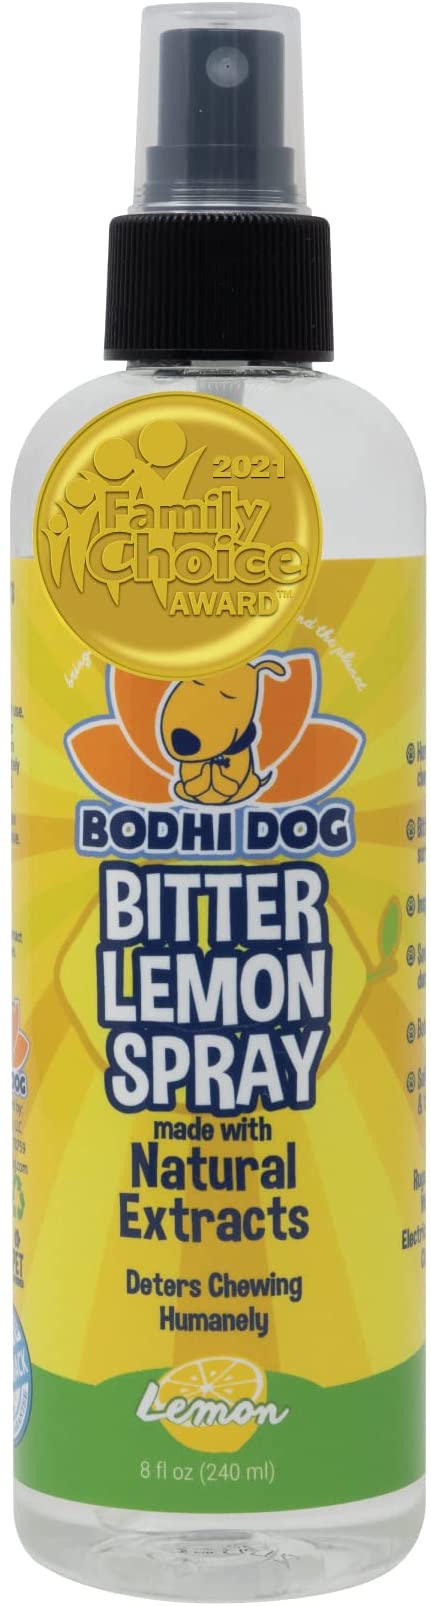 Bodhi Dog Bitter Lemon Spray | Stop Biting and Chewing for Puppies Older Dogs and Cats